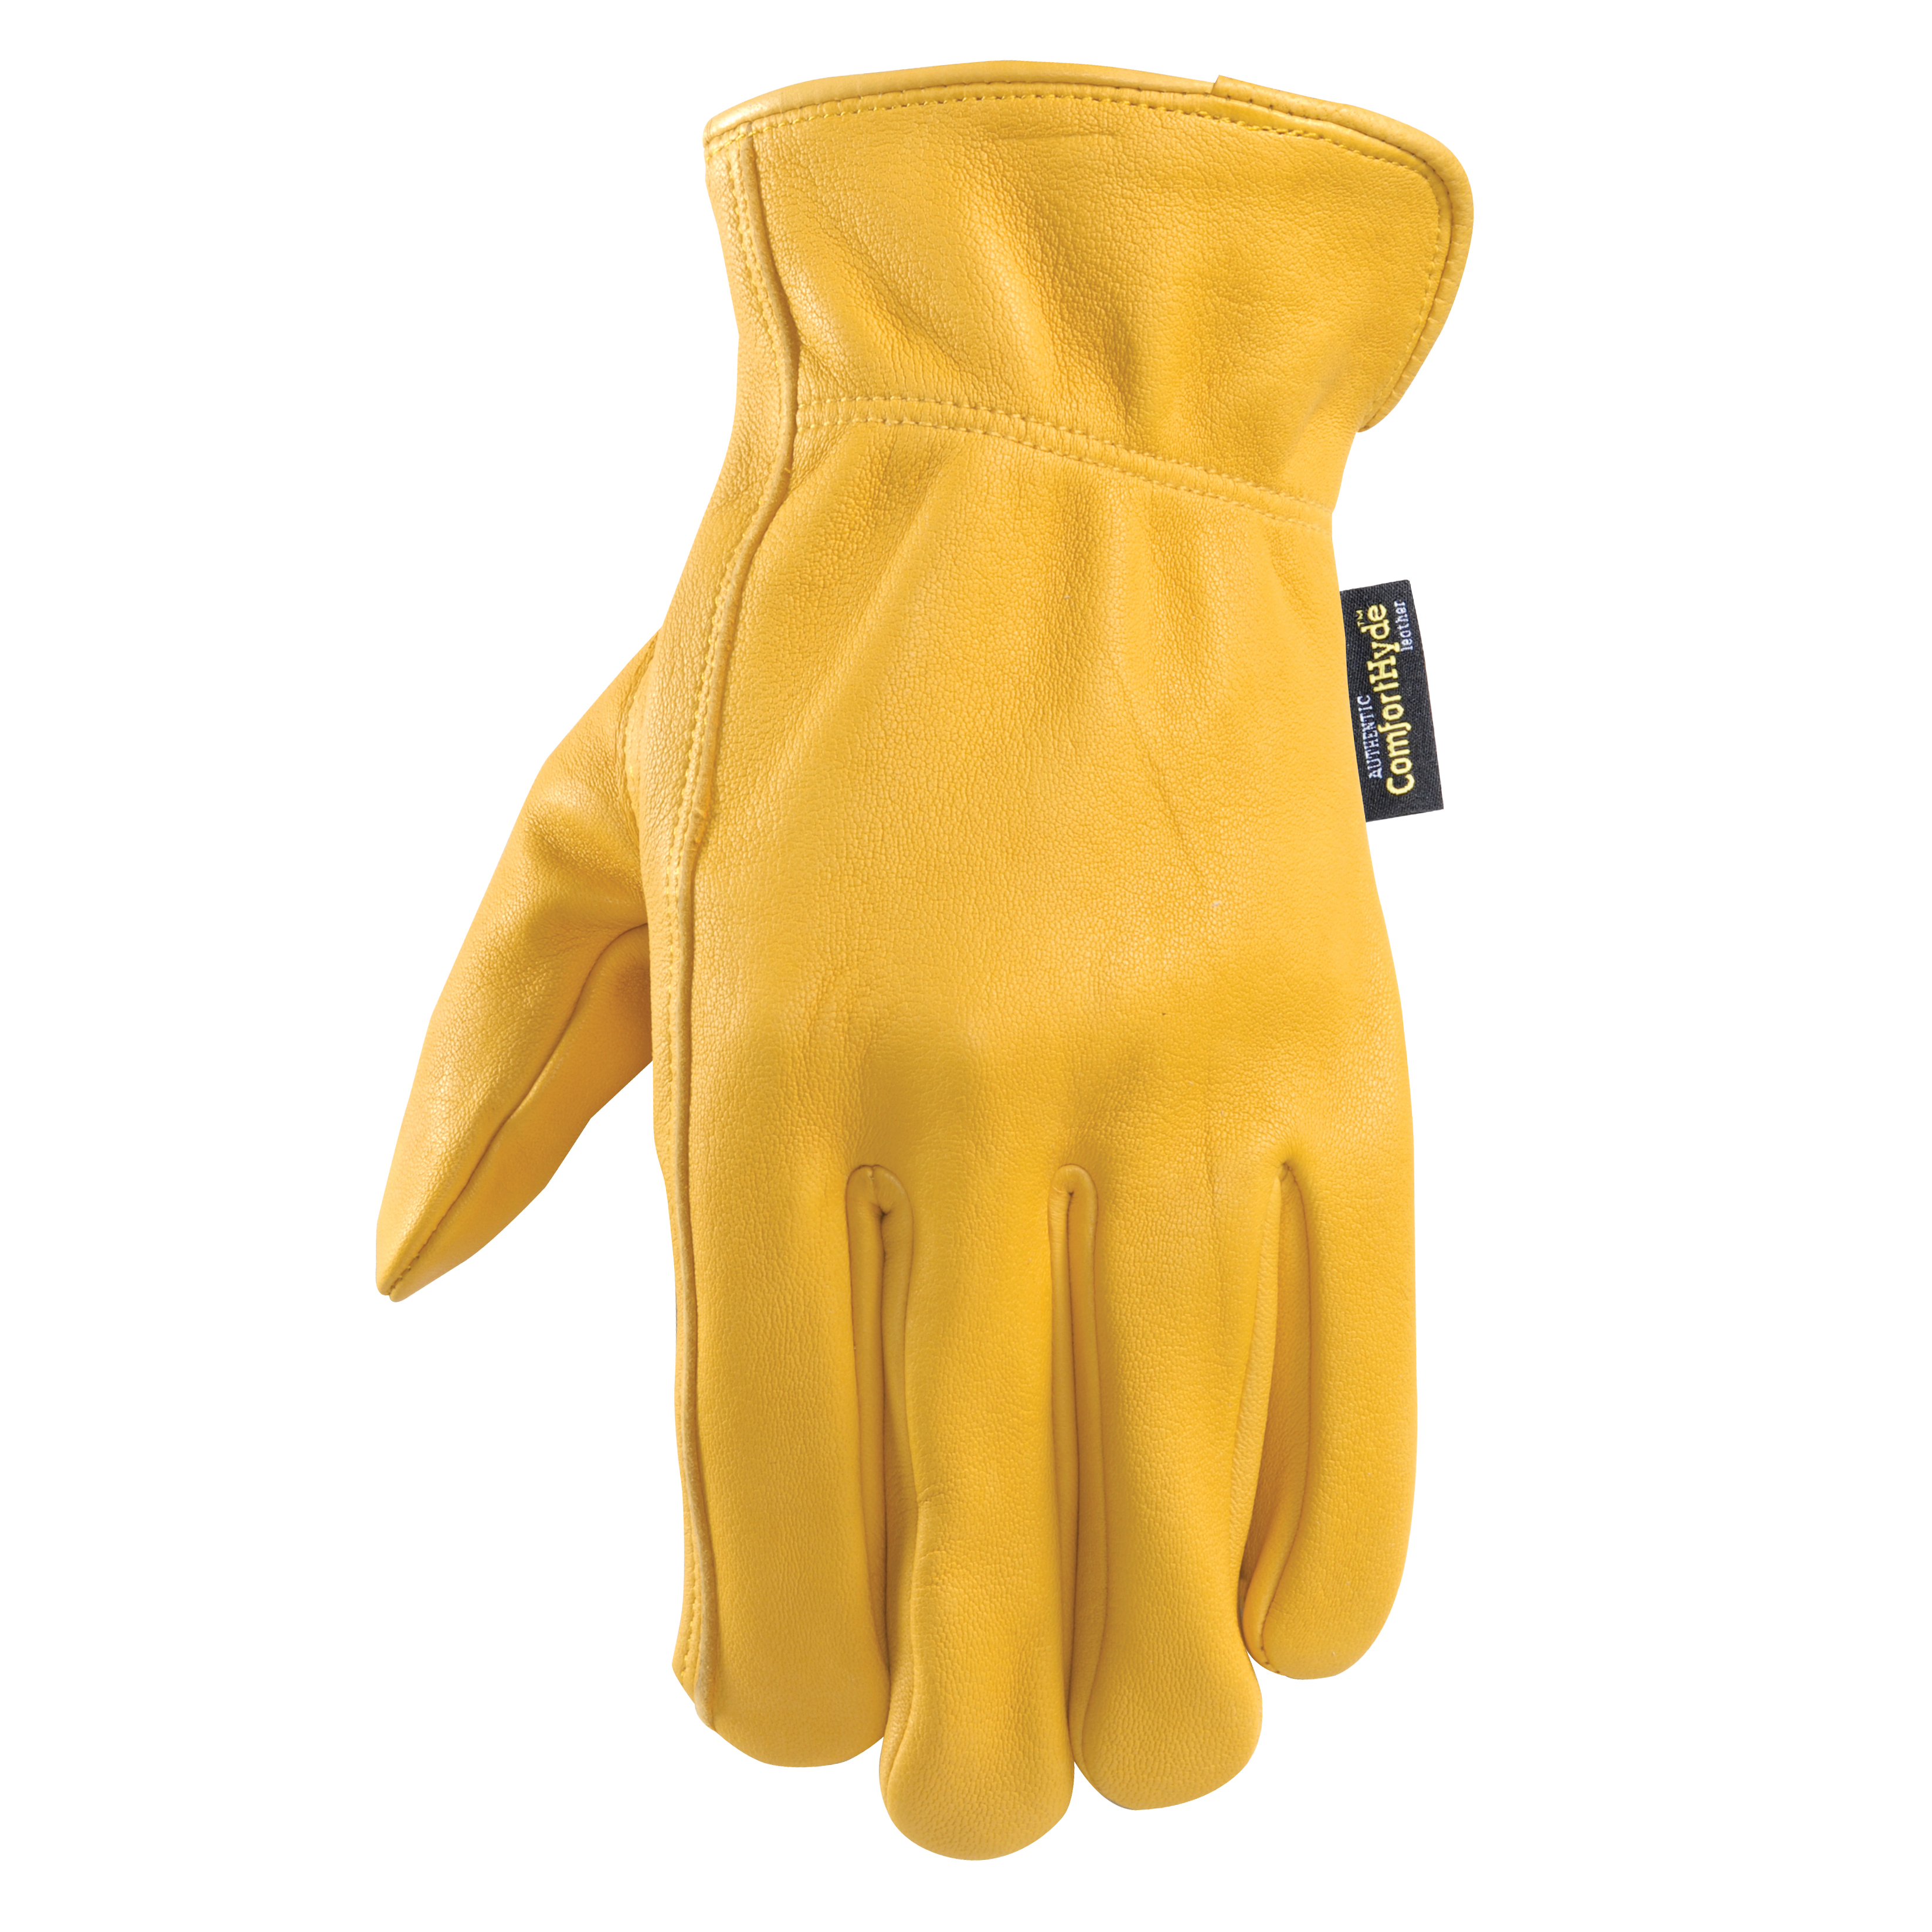 ComfortHyde 984-XL Slip-On Work Gloves, Men's, XL, 10 to 10-1/2 in L, Deer Skin Leather, Gold/Yellow